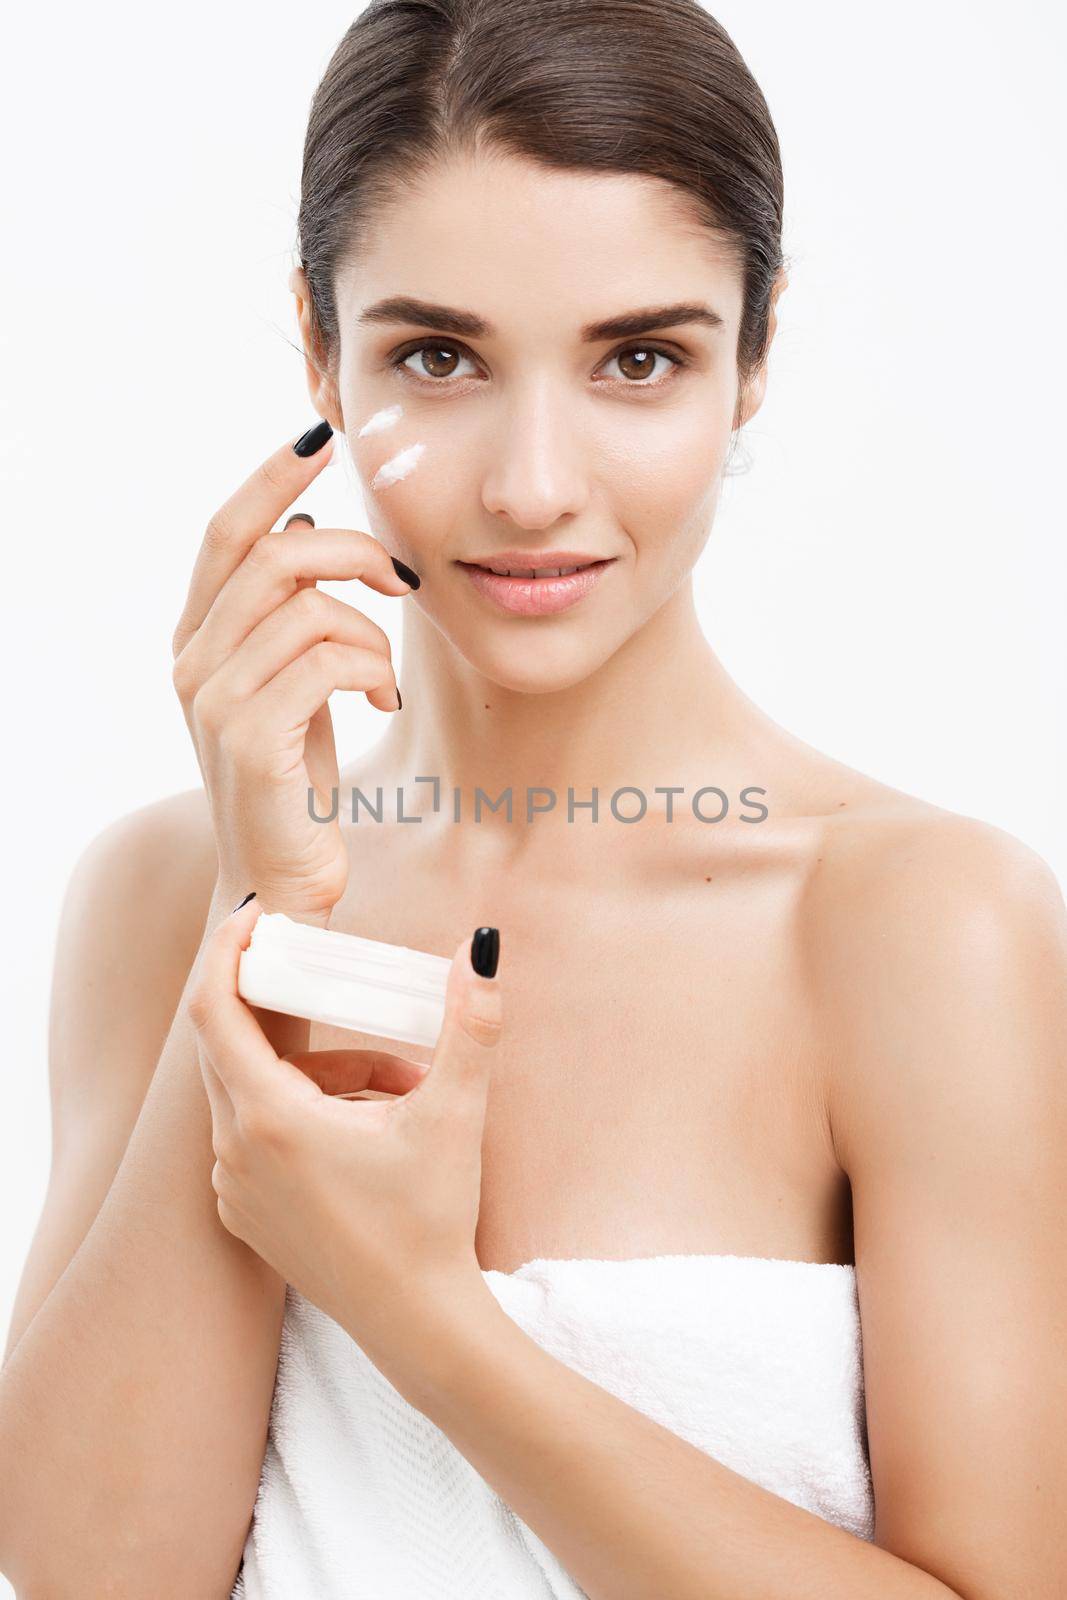 Beauty Youth Skin Care Concept - Close up Beautiful Caucasian Woman Face Portrait applying some cream to her face. Beautiful Spa model Girl with Perfect Fresh Clean Skin over white background